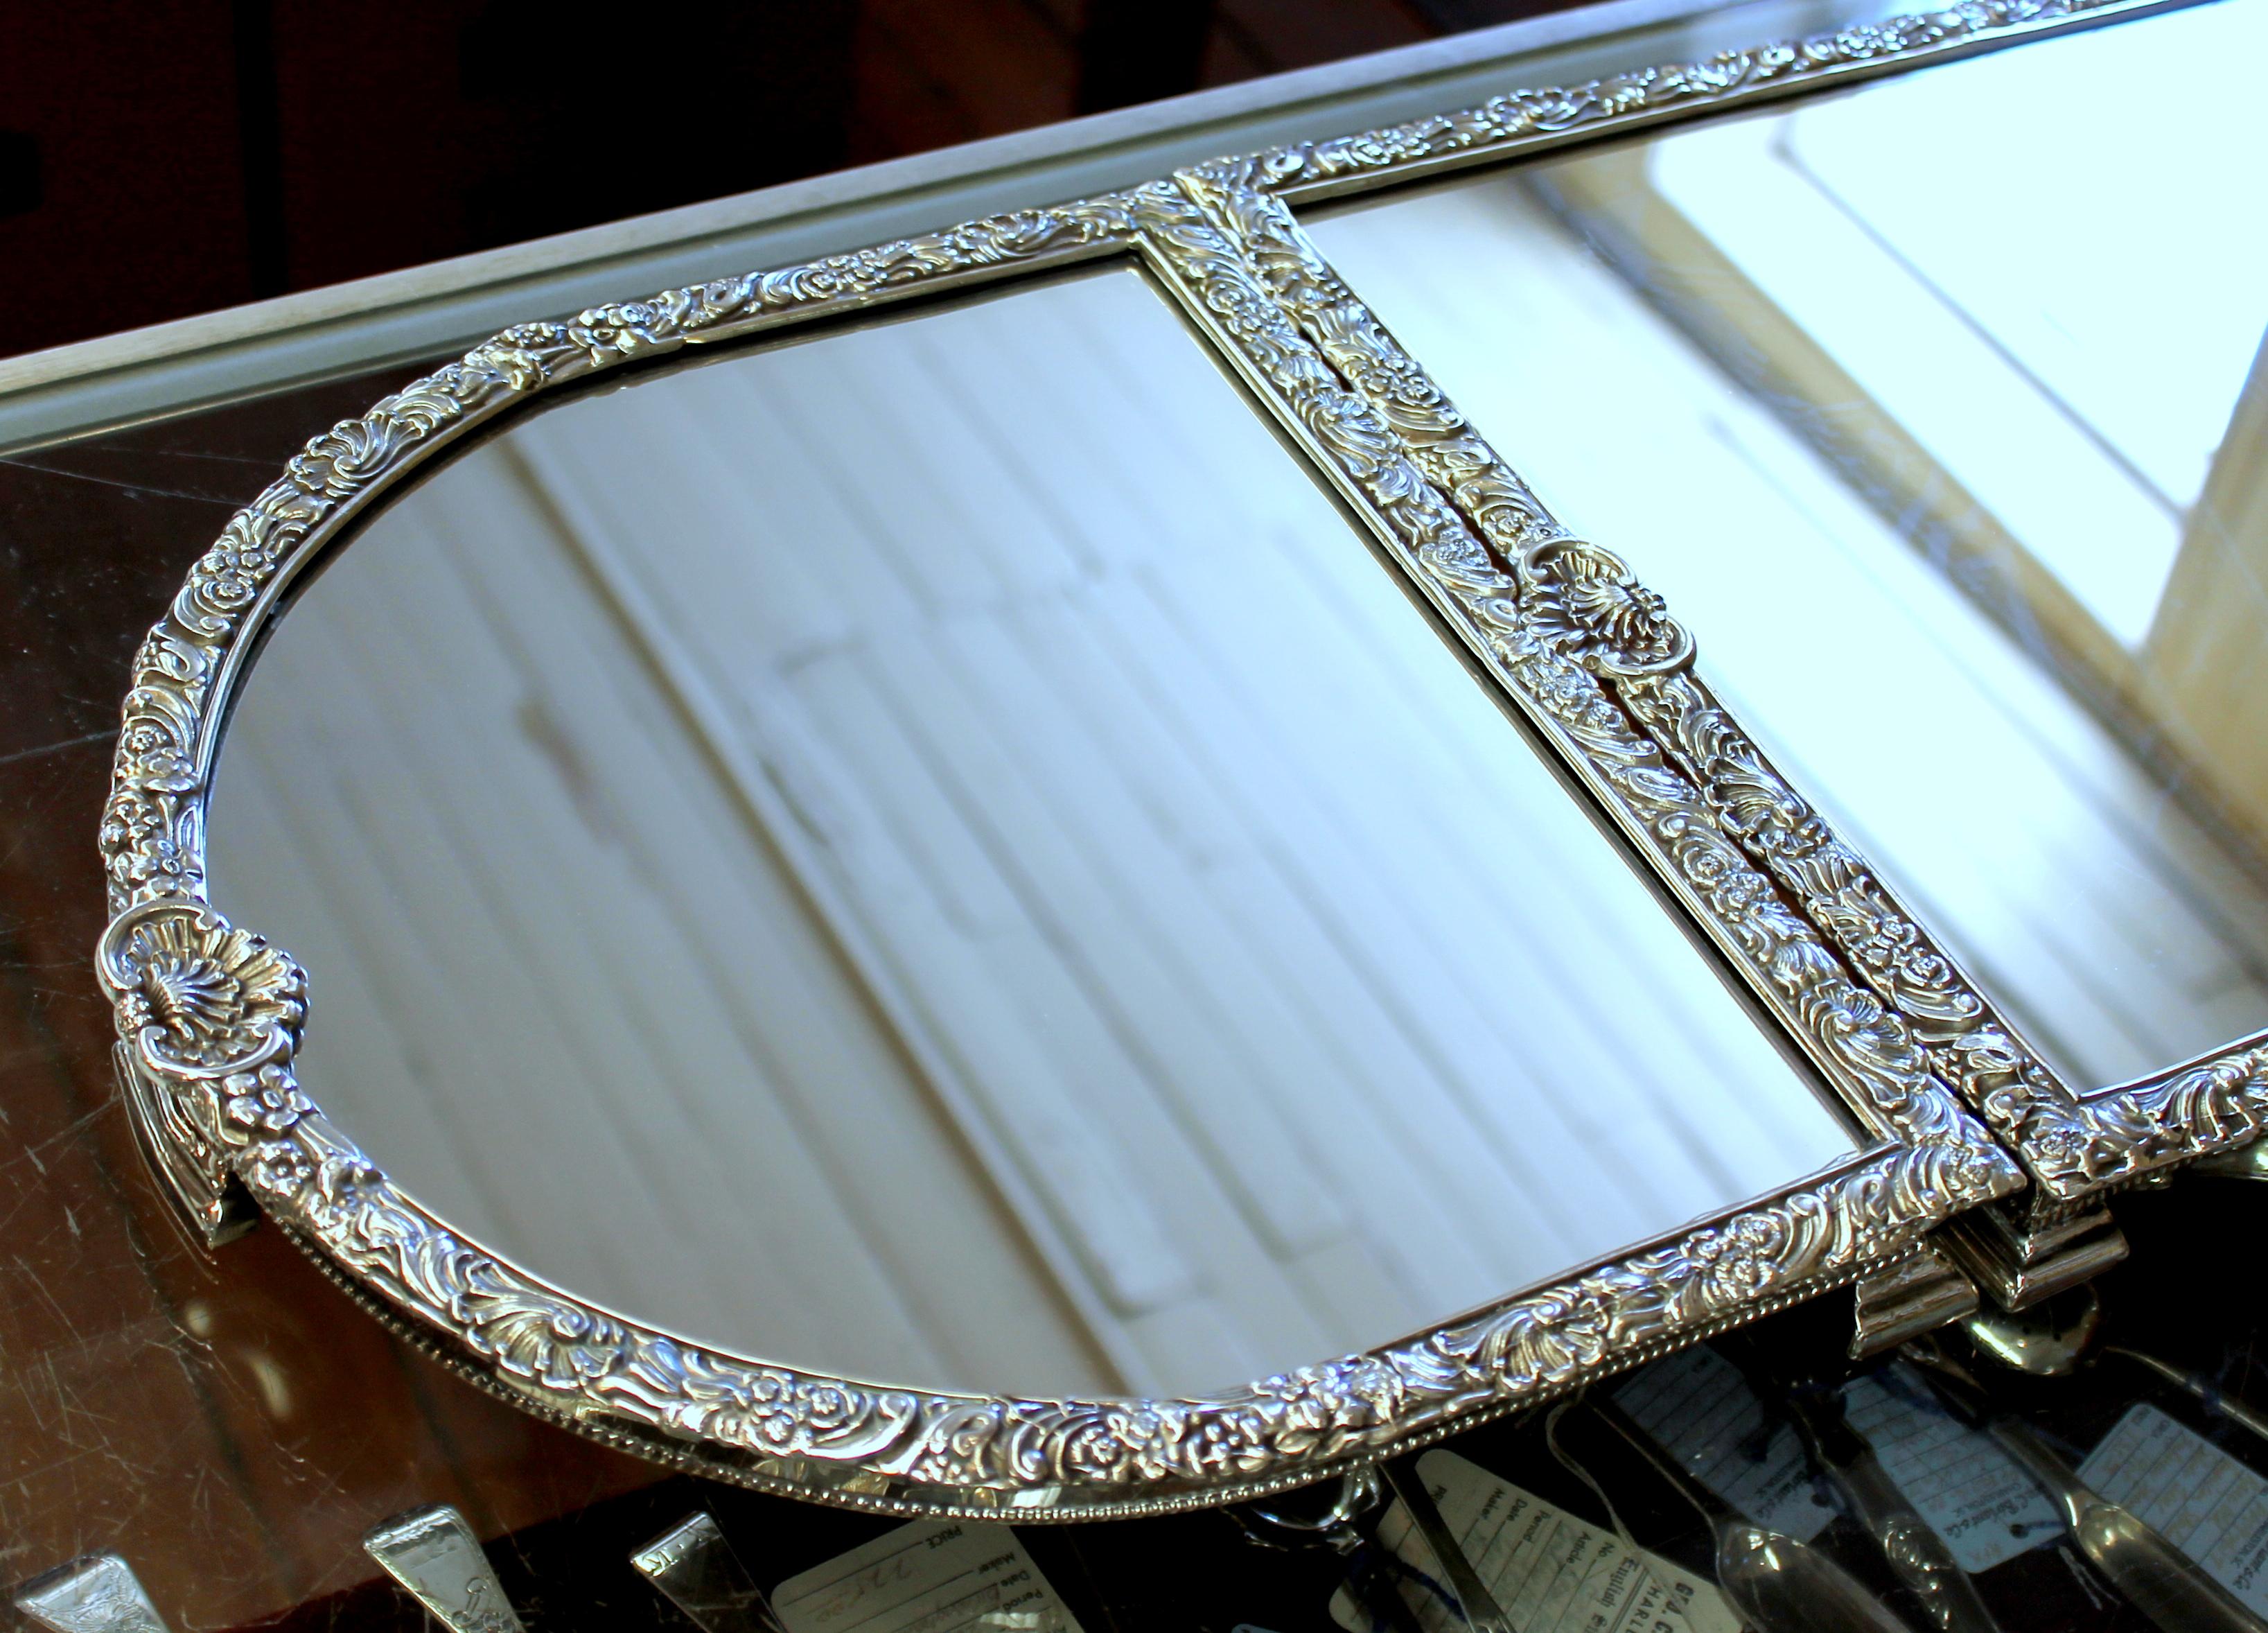 Finest quality reproduction English Sheffield silver-plate Rococo style three-section mirror plateau
-Antique copy- Made in Sheffield, England. This fabulous Sheffield silver plate reproduction is made in Sheffield, England from
original 19th